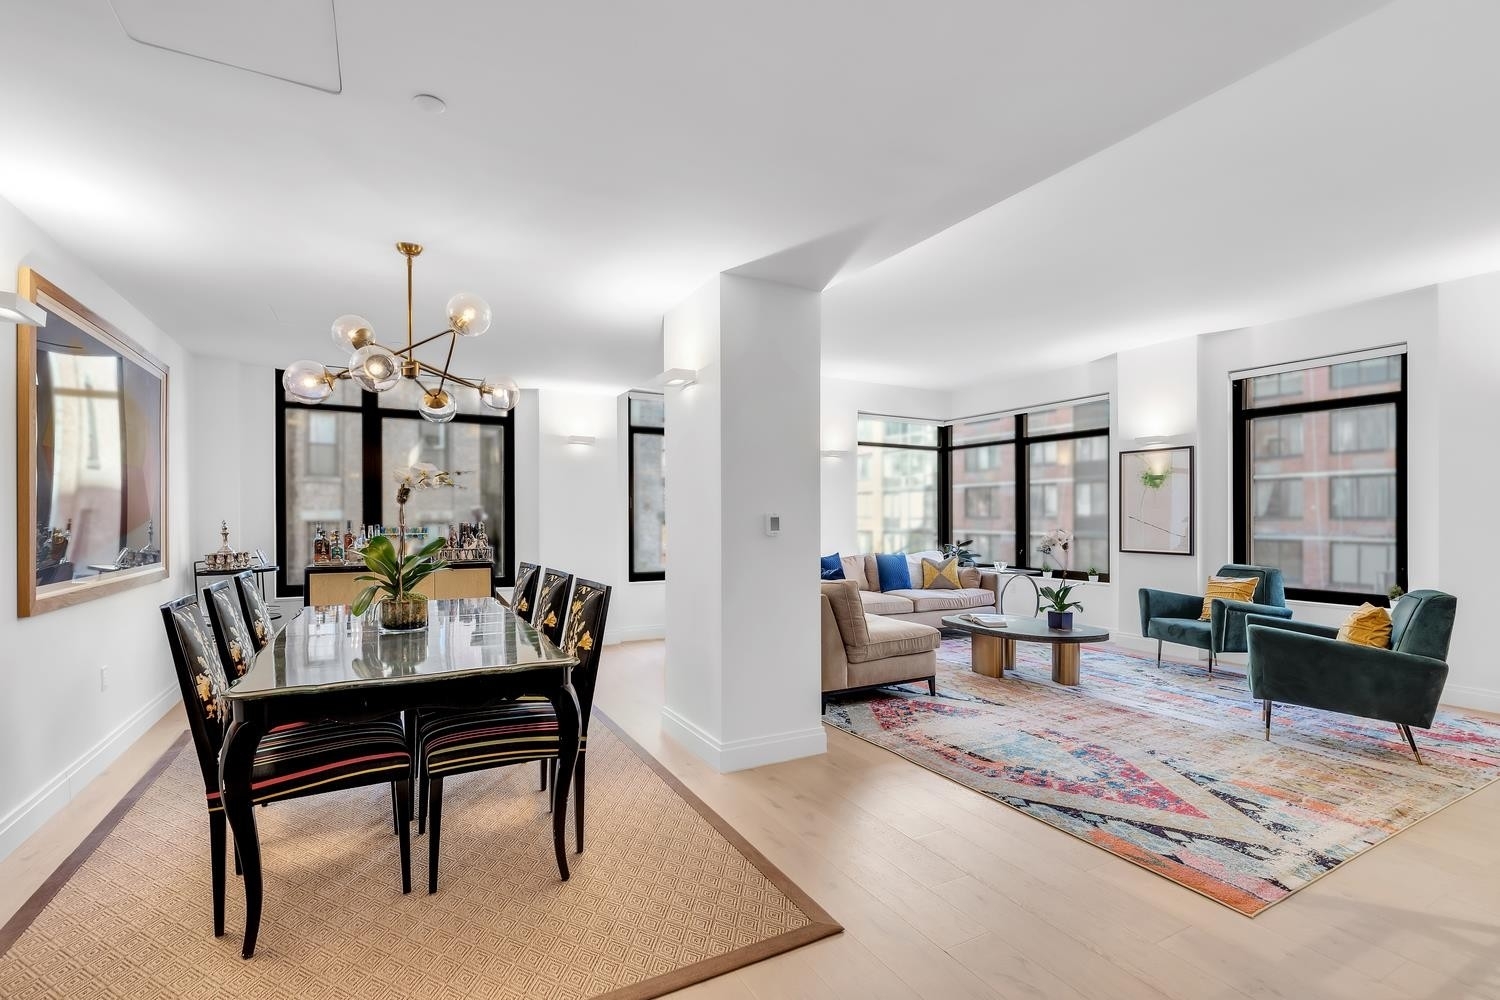 Condominium for Sale at Dahlia, 212 W 95TH ST, 3AC Upper West Side, New York, New York 10025